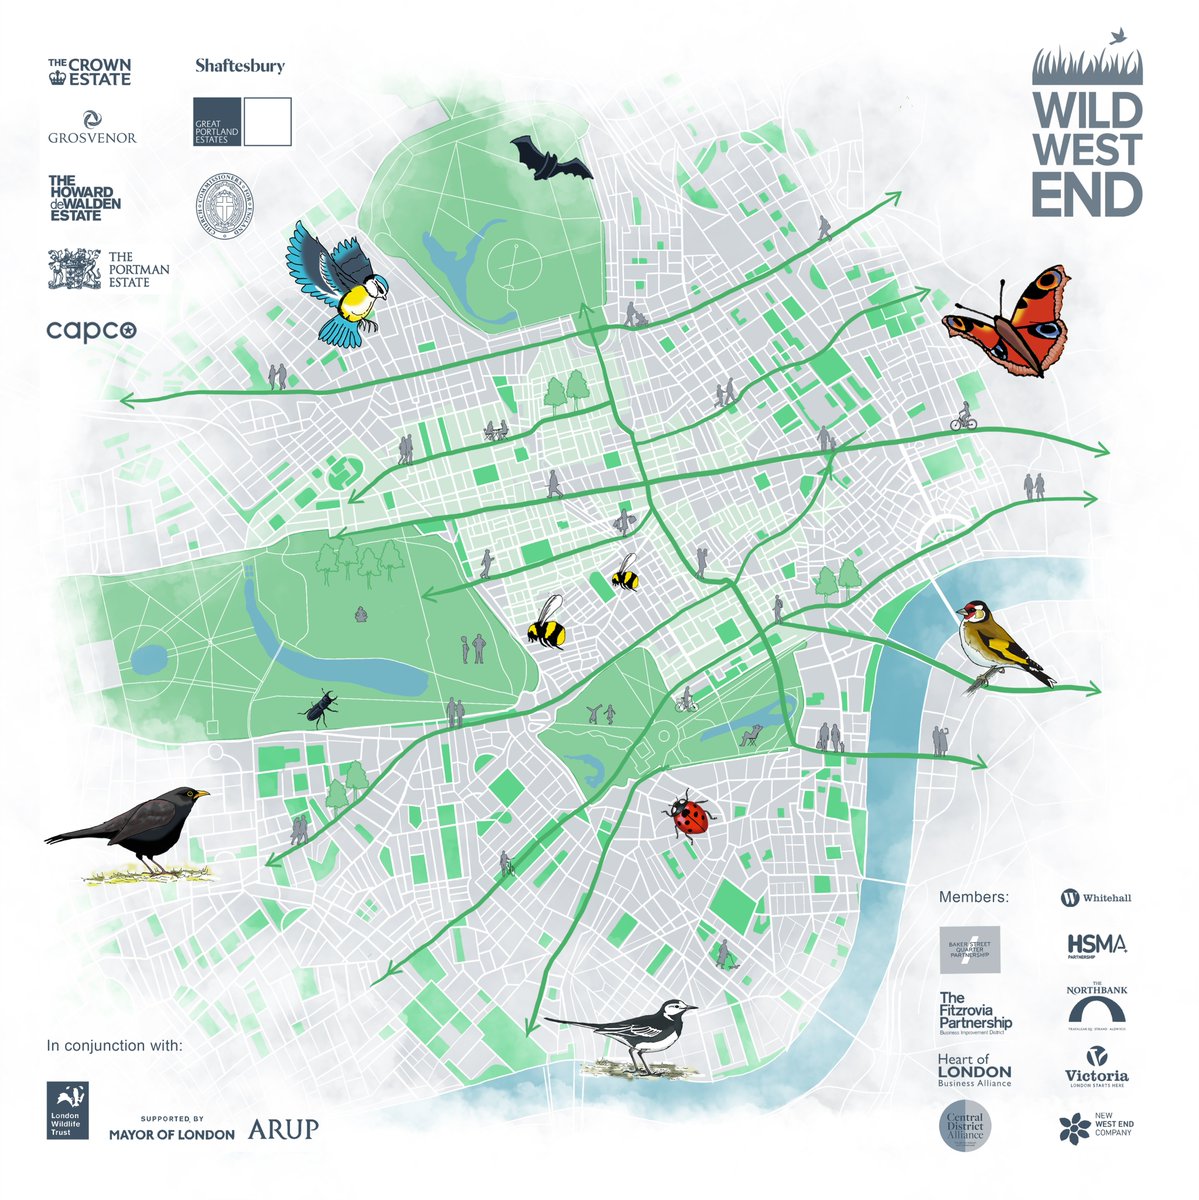 Today is #WorldWildlifeDay2022! This year's theme is 'Recovering key species for ecosystem restoration'. We work all year round to to encourage birds, bees and bats back into central London - you can find out more about our target species on our website ➡️wildwestend.london/target-species